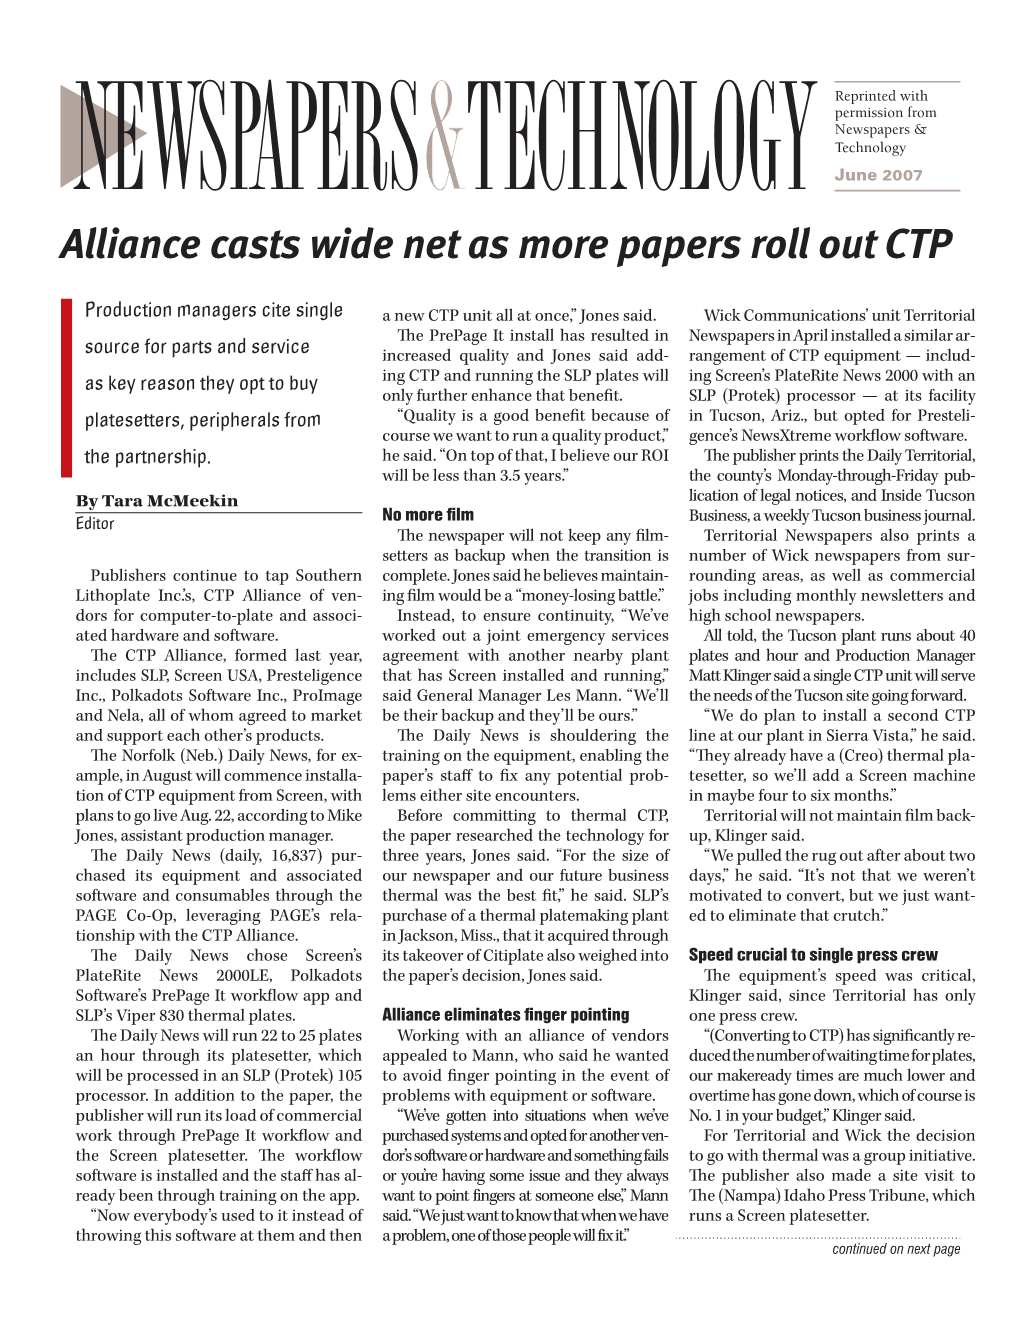 Alliance Casts Wide Net As More Papers Roll out CTP